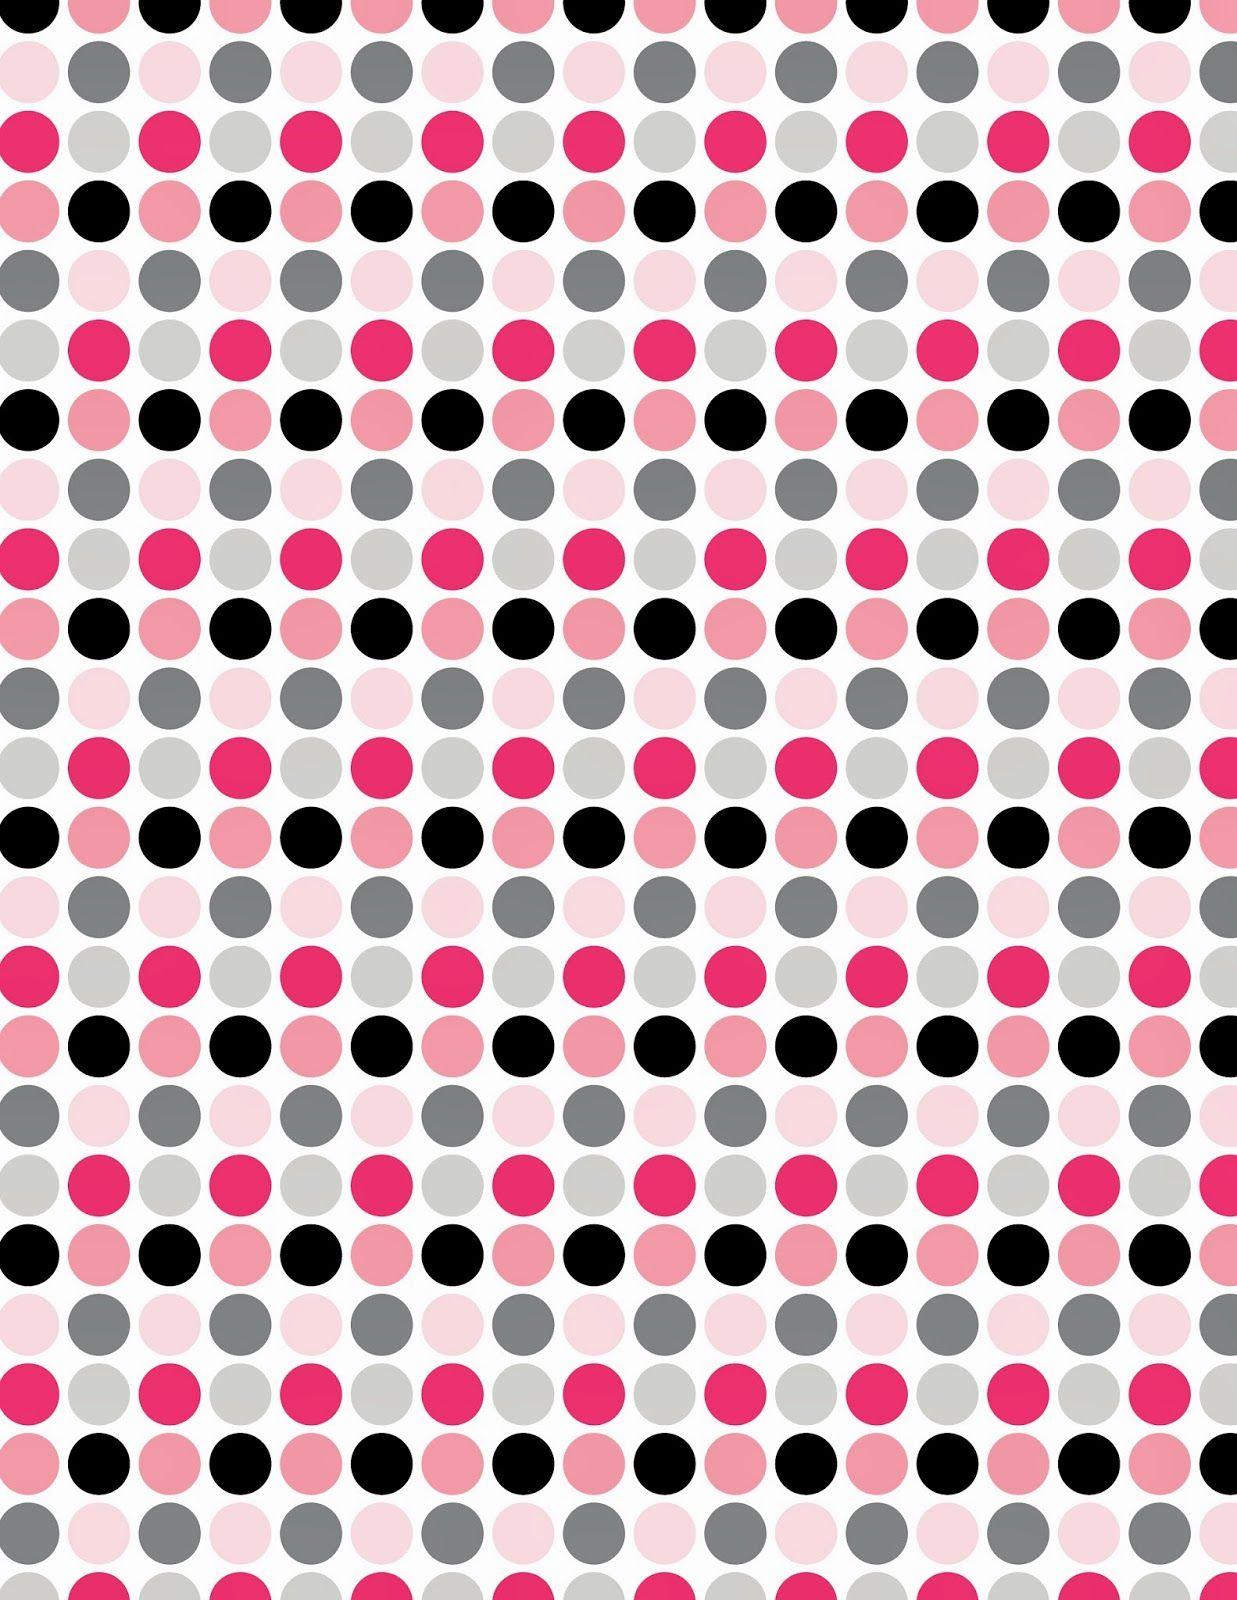 Minnie Mouse Polka Dot Wallpapers - Top Free Minnie Mouse Polka Dot ...